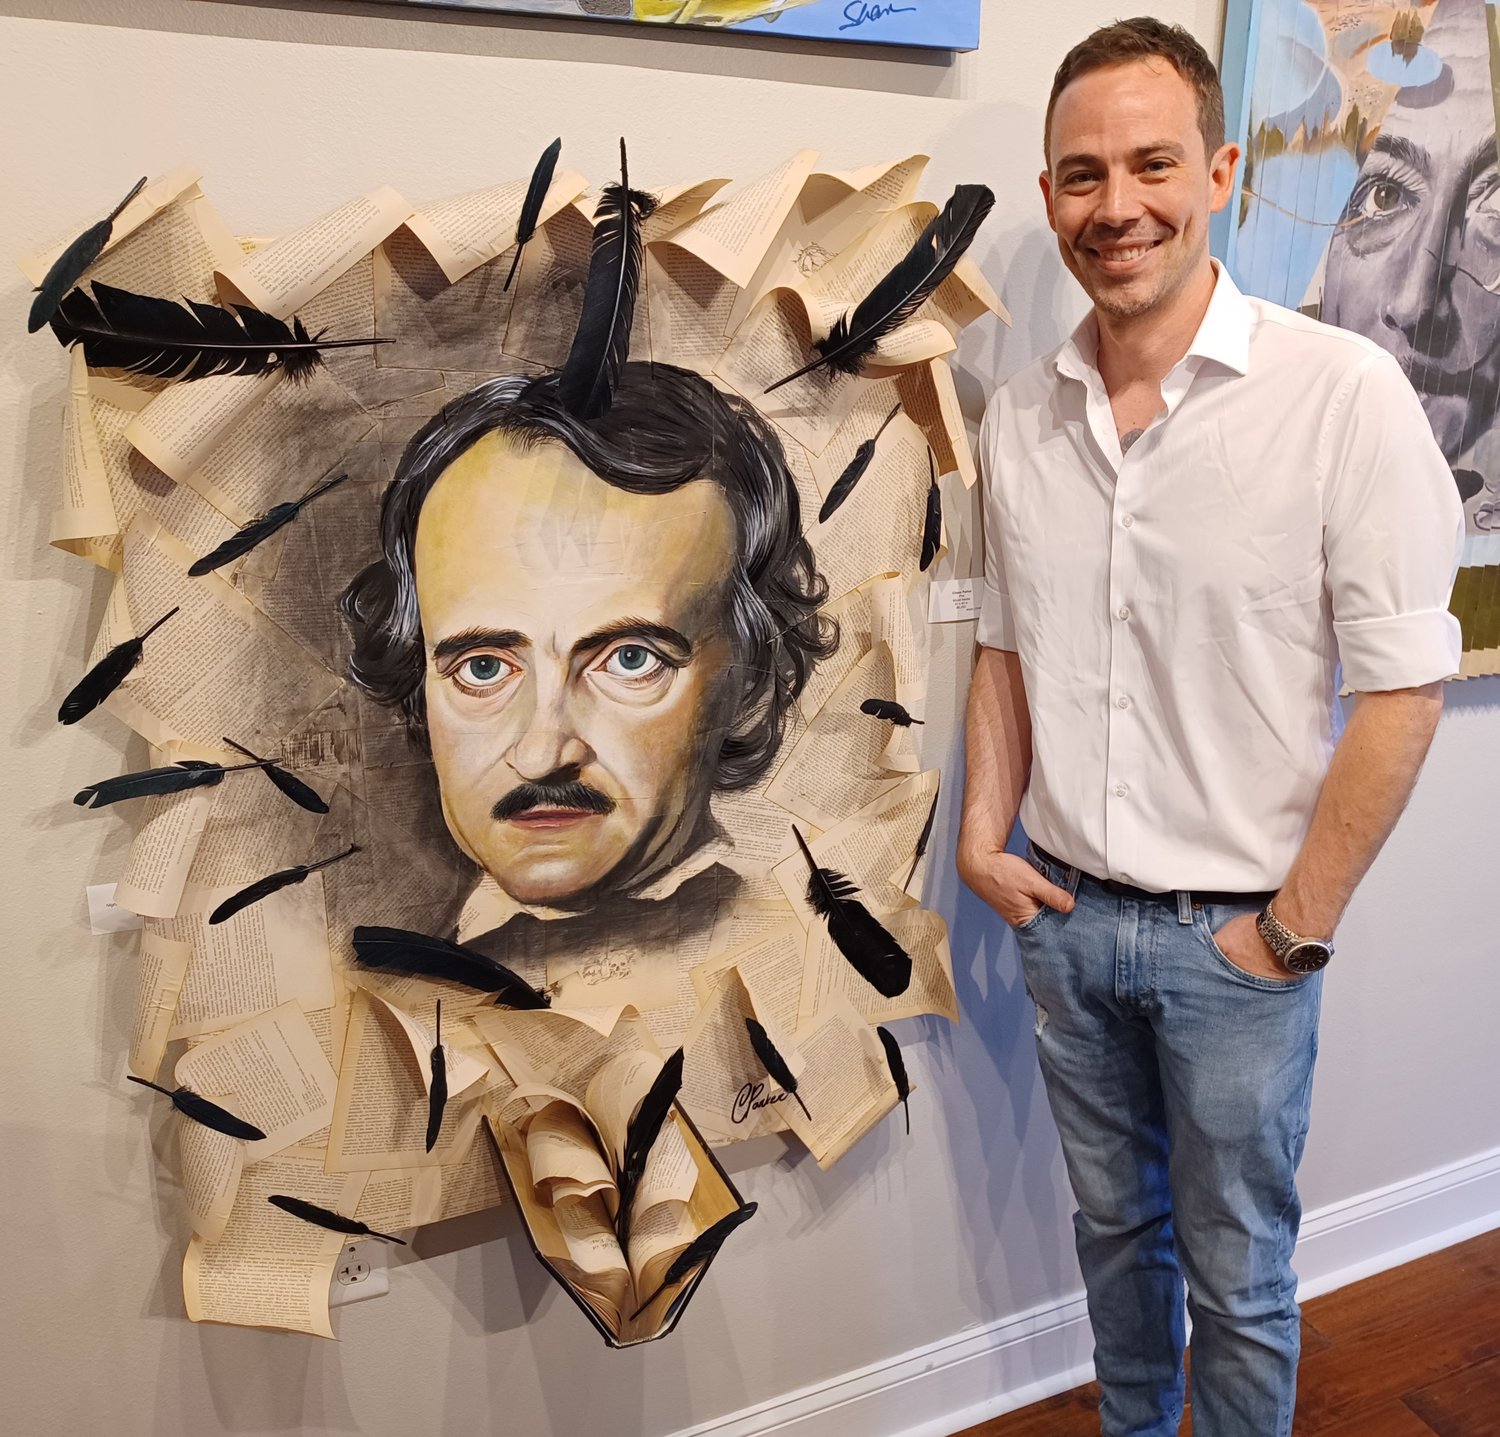 Artist Chase Parker with his eye-catching work, “Poe,” at the Grand Bohemian Gallery in St. Augustine.